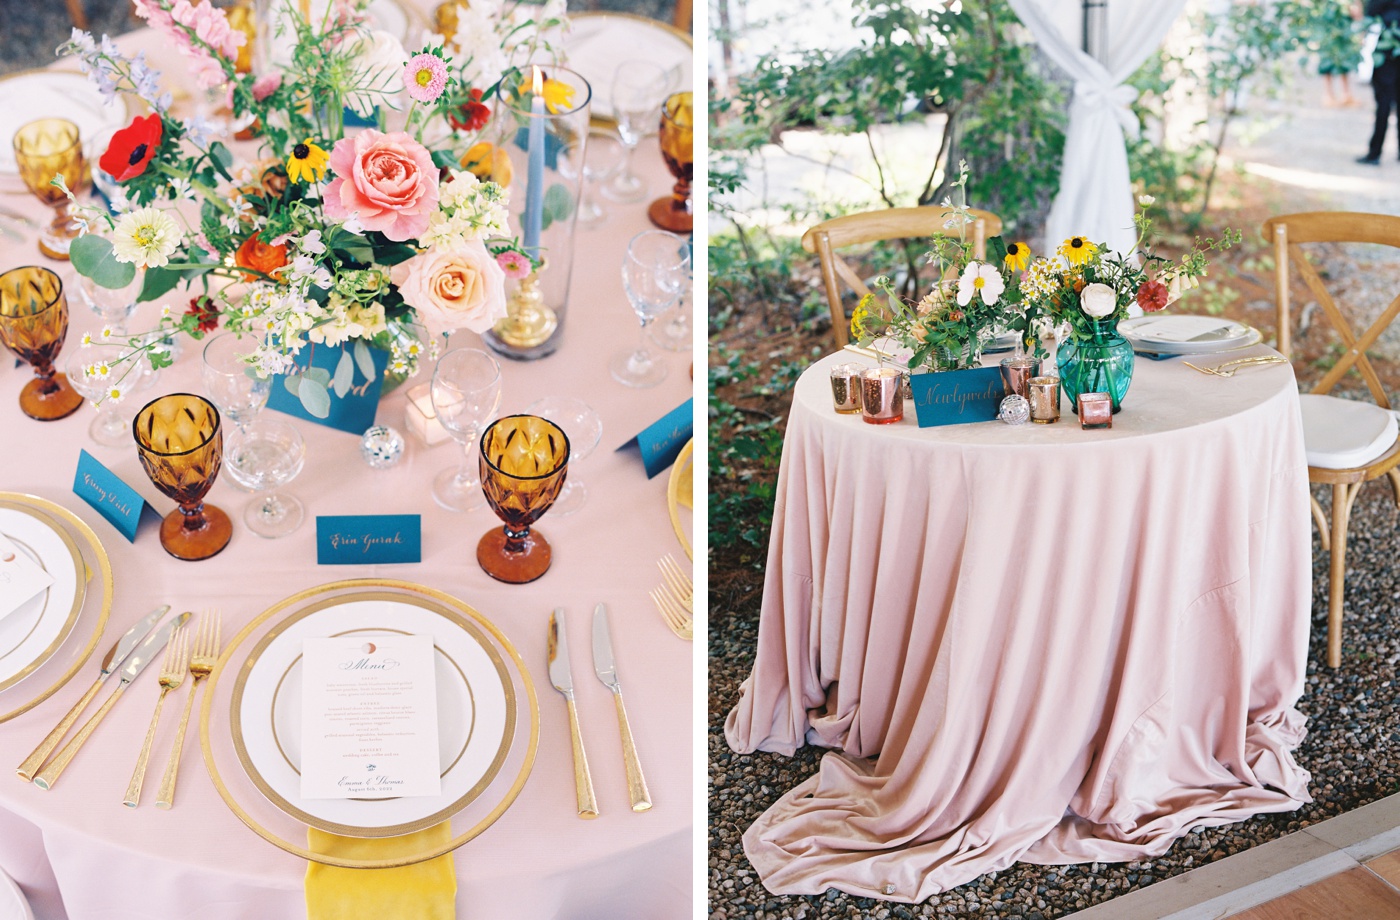 Pink tablecloths, yellow napkins, and blue place cards for a colorful wedding reception